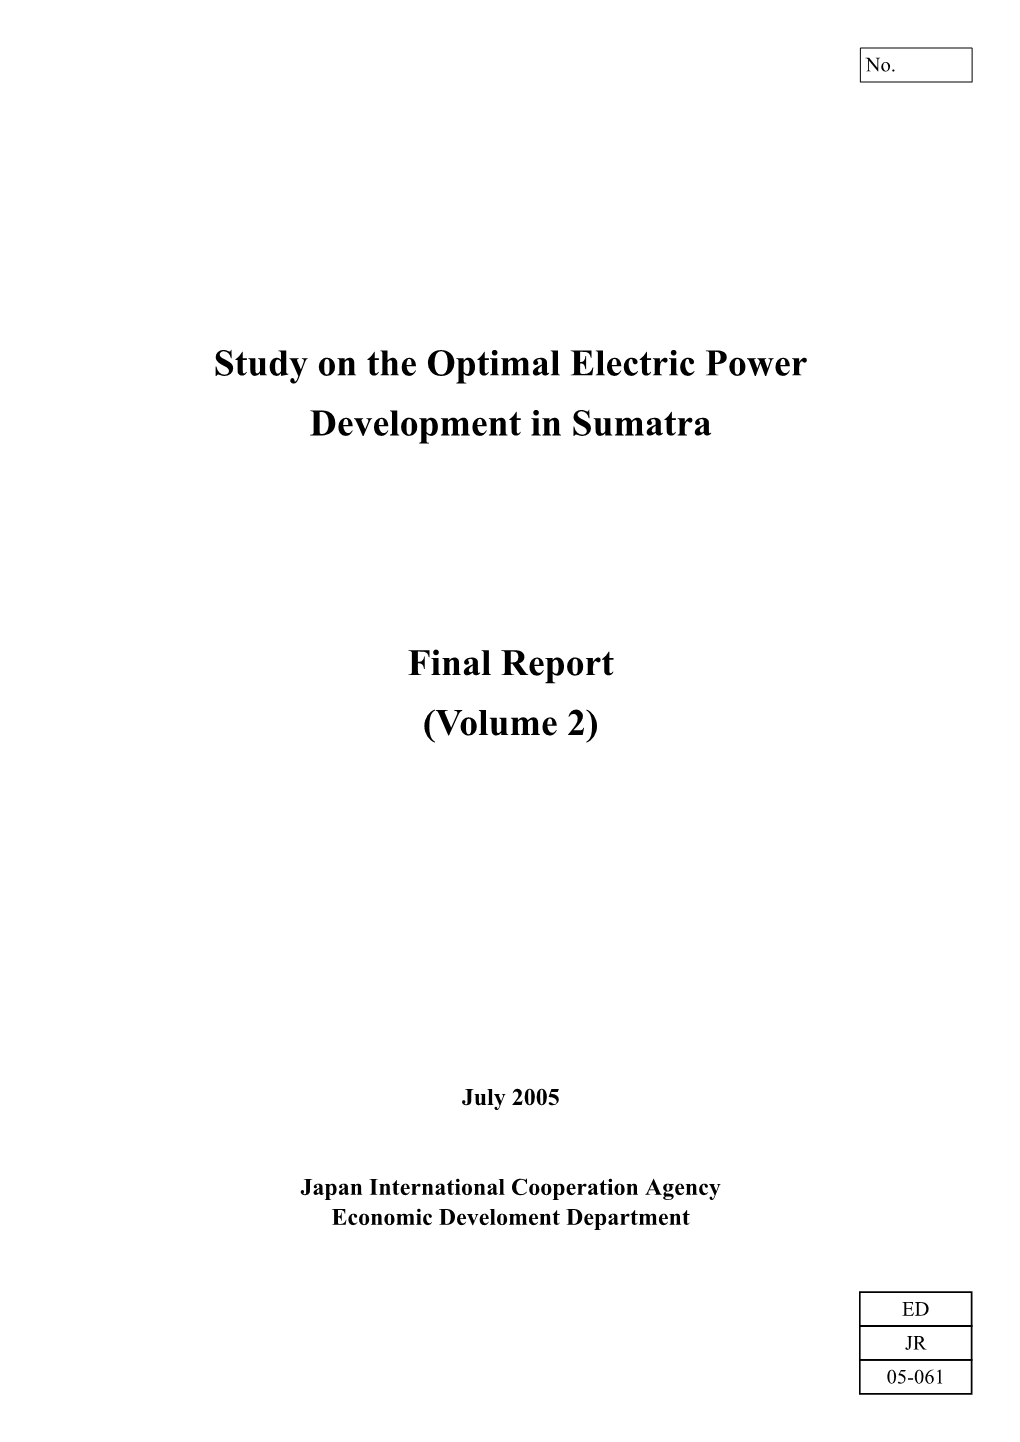 Study on the Optimal Electric Power Development in Sumatra Final Report